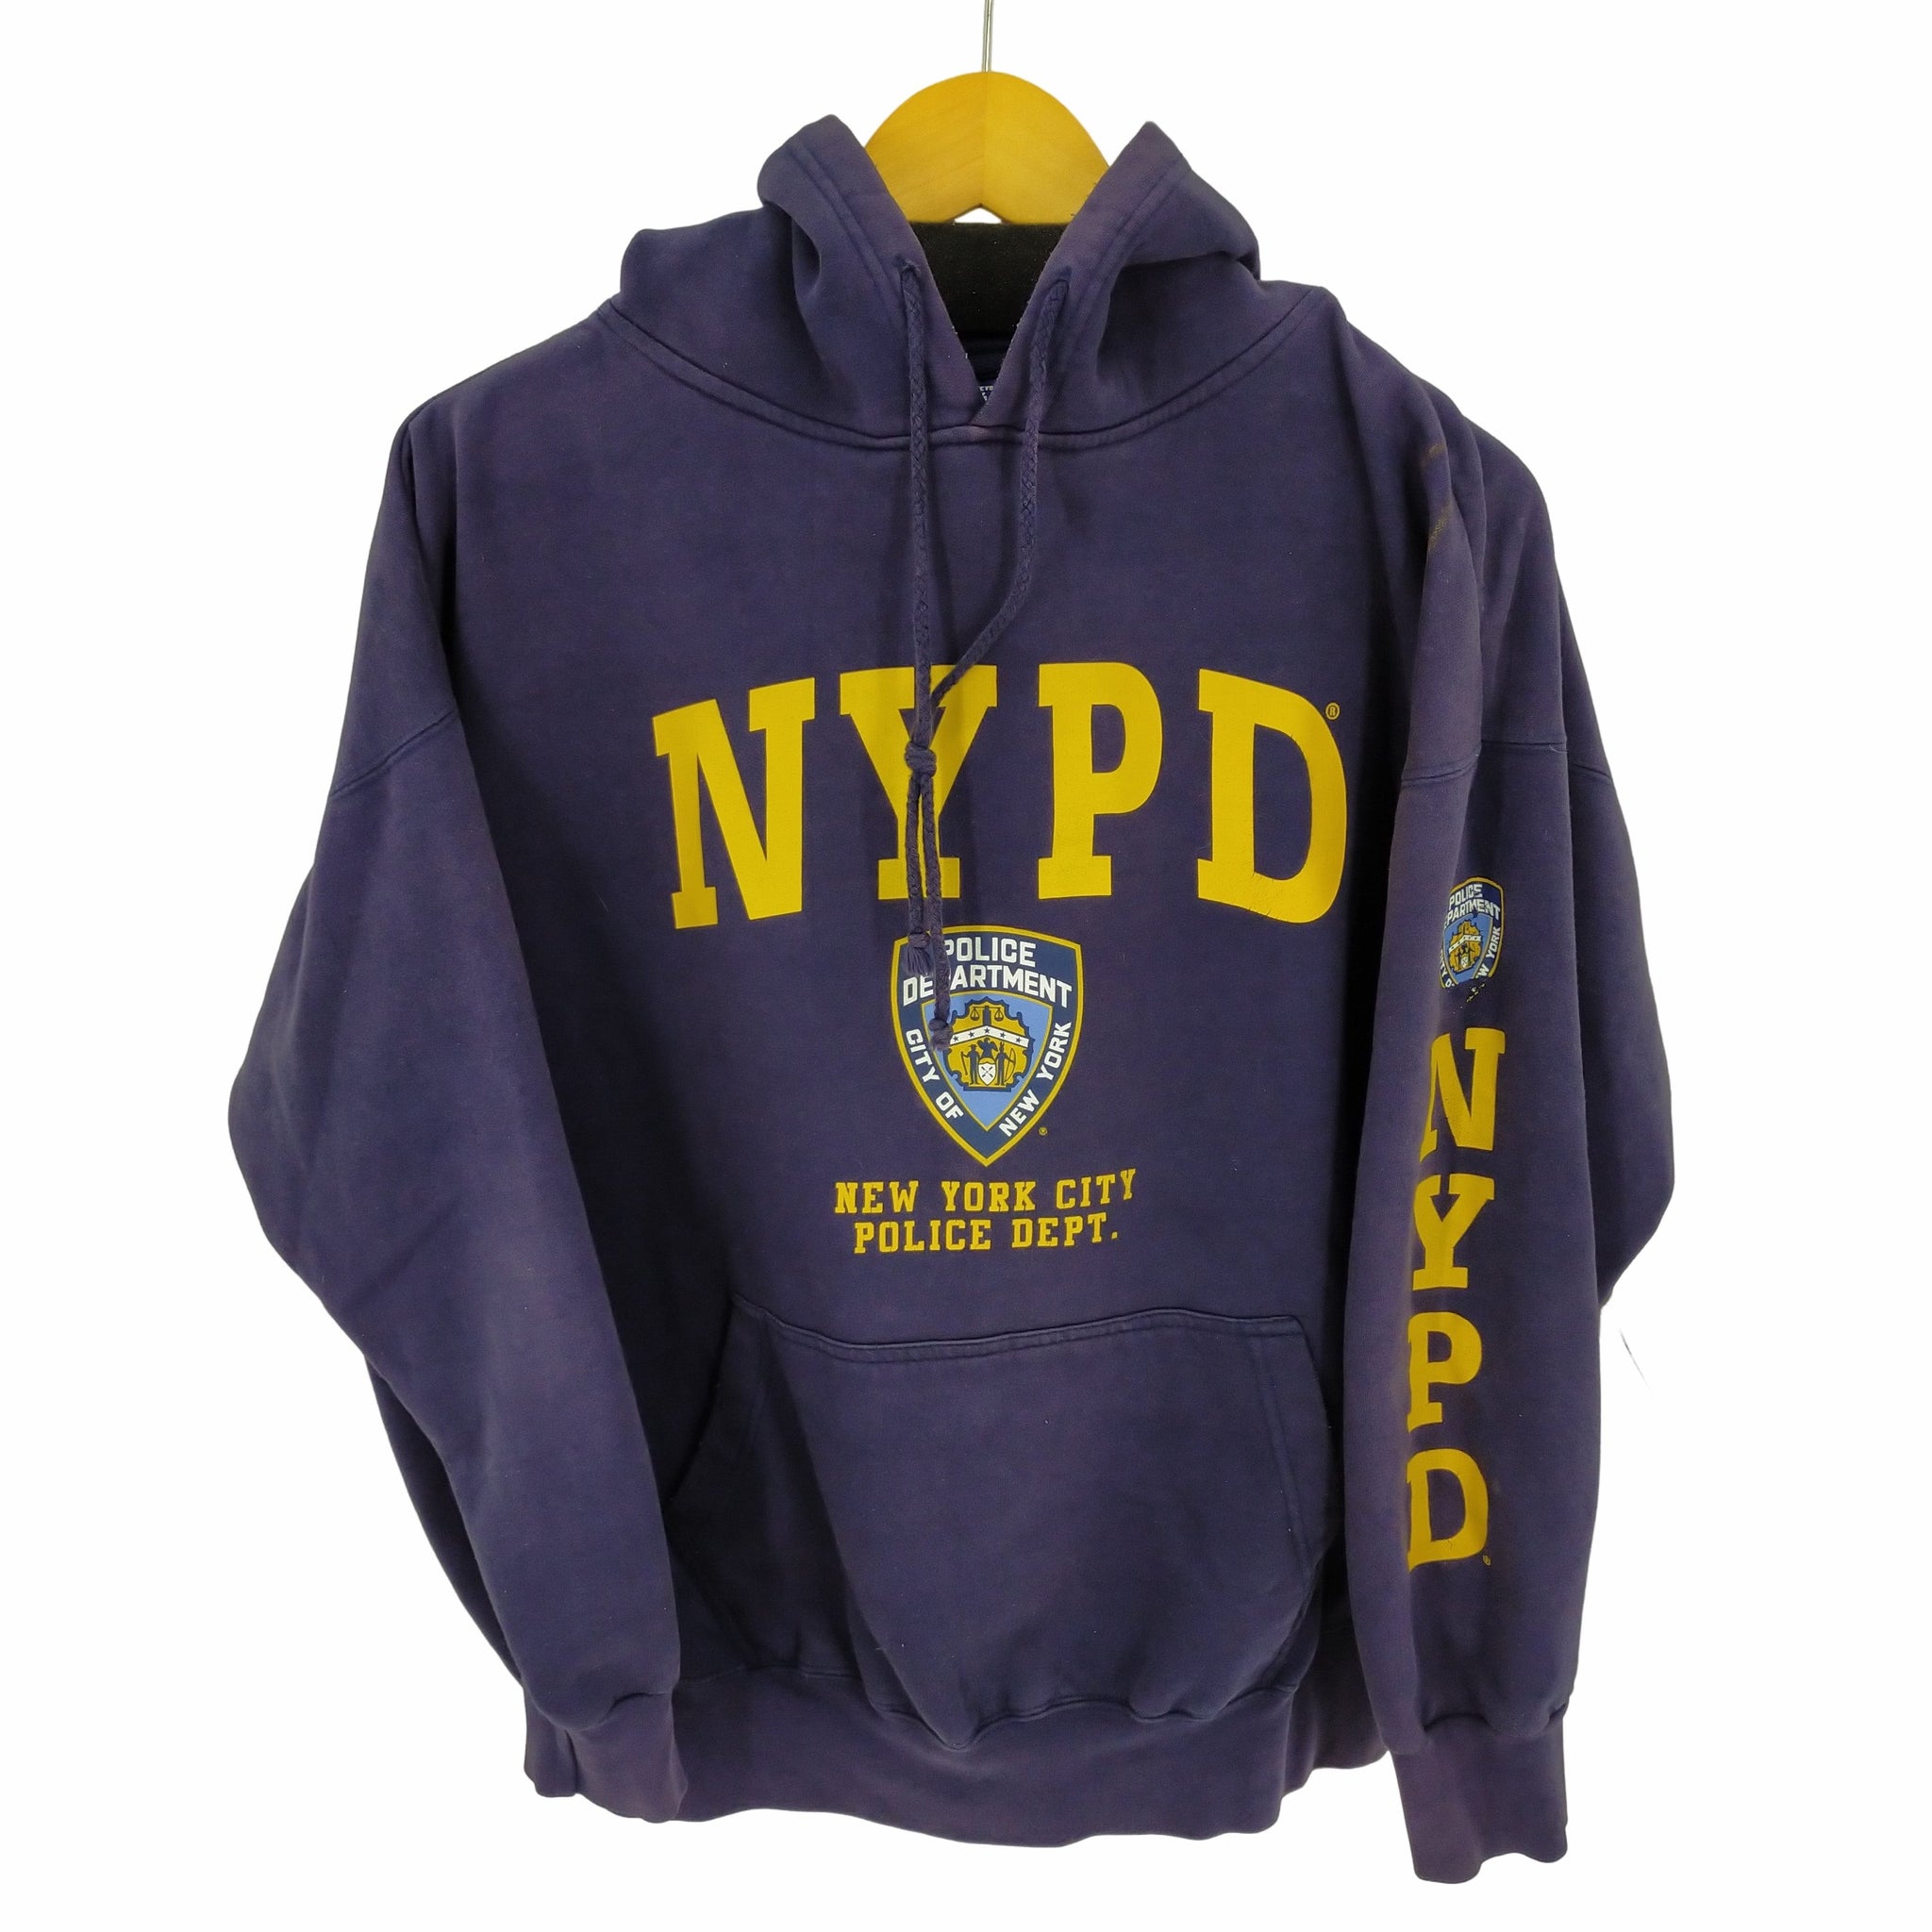 USED古着(ユーズドフルギ){{CITY OF NEW YORK}} NYPDプリント パーカー